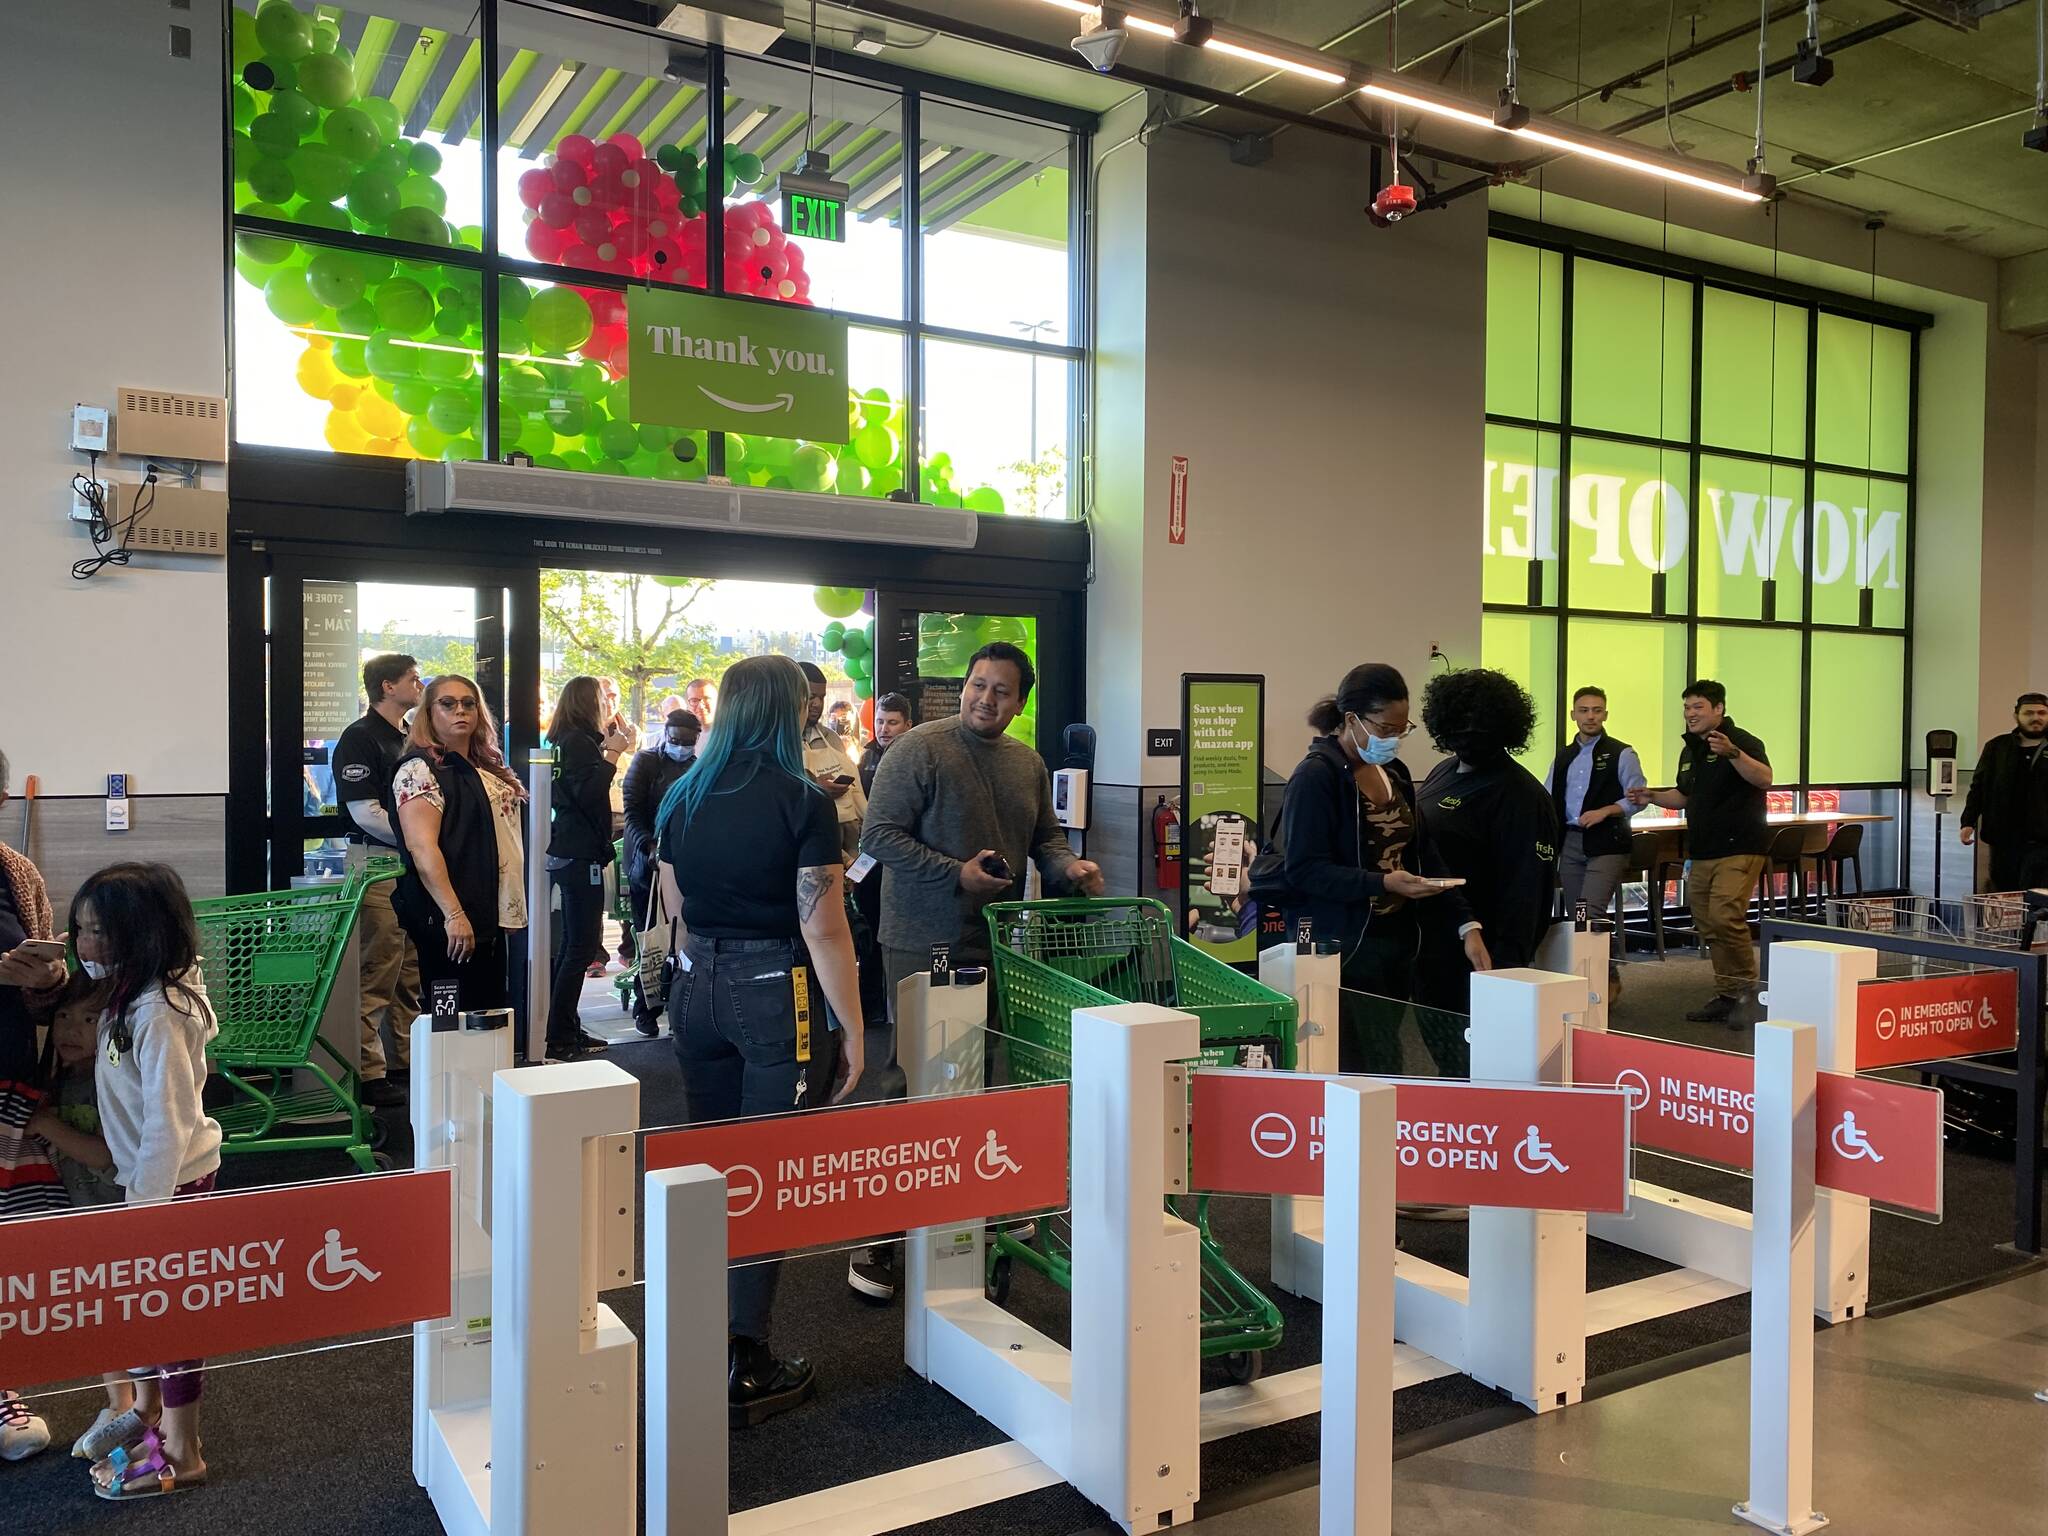 People scan to enter the Amazon Fresh store on Aug. 11. Scanning their app allows the customer to later skip the traditional checkout and charges their card using Just Walk Out technology. Olivia Sullivan/the Mirror